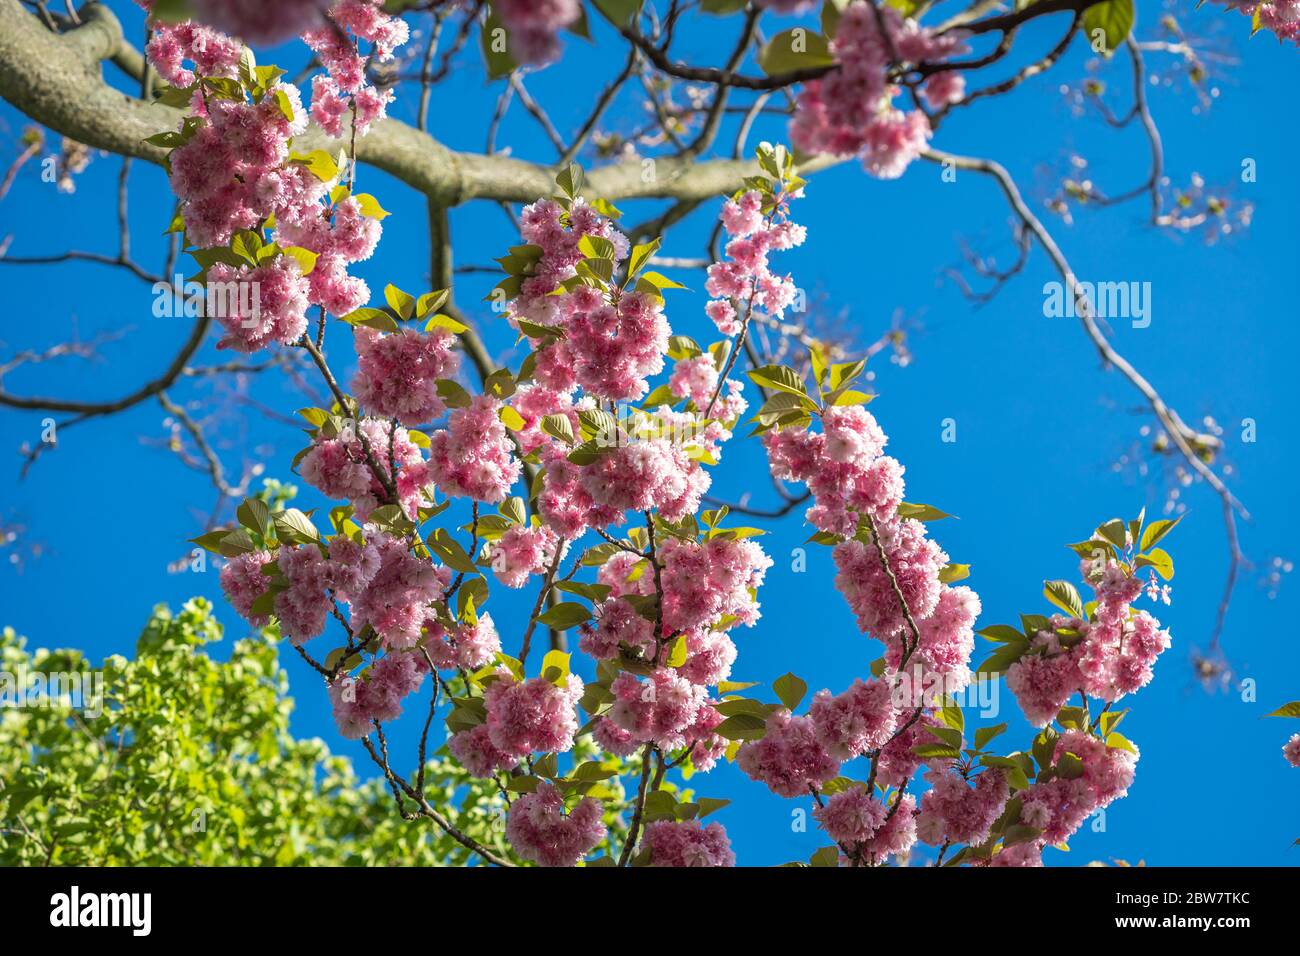 Cherry blossoms flowers Stock Photo